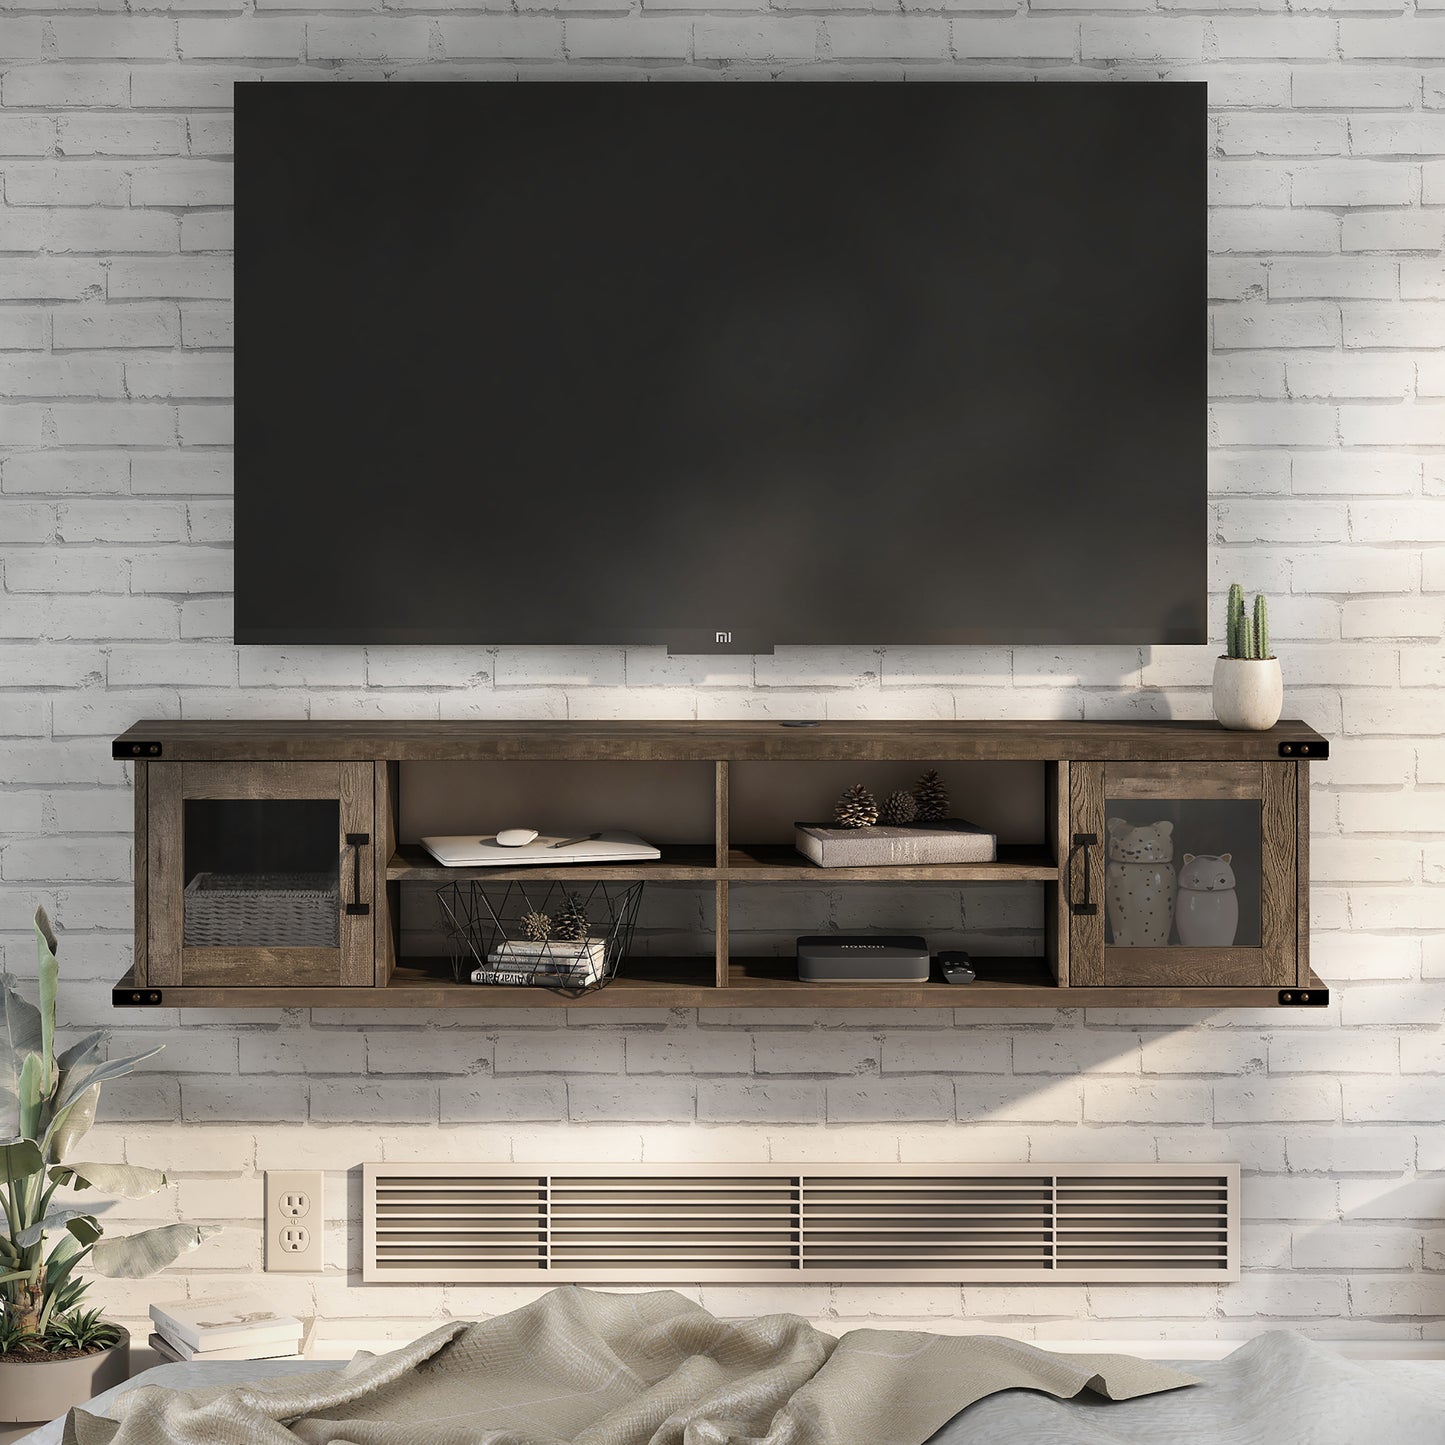 Front-facing modern reclaimed oak four-shelf wall mountable TV stand with glass doors in a living room with accessories